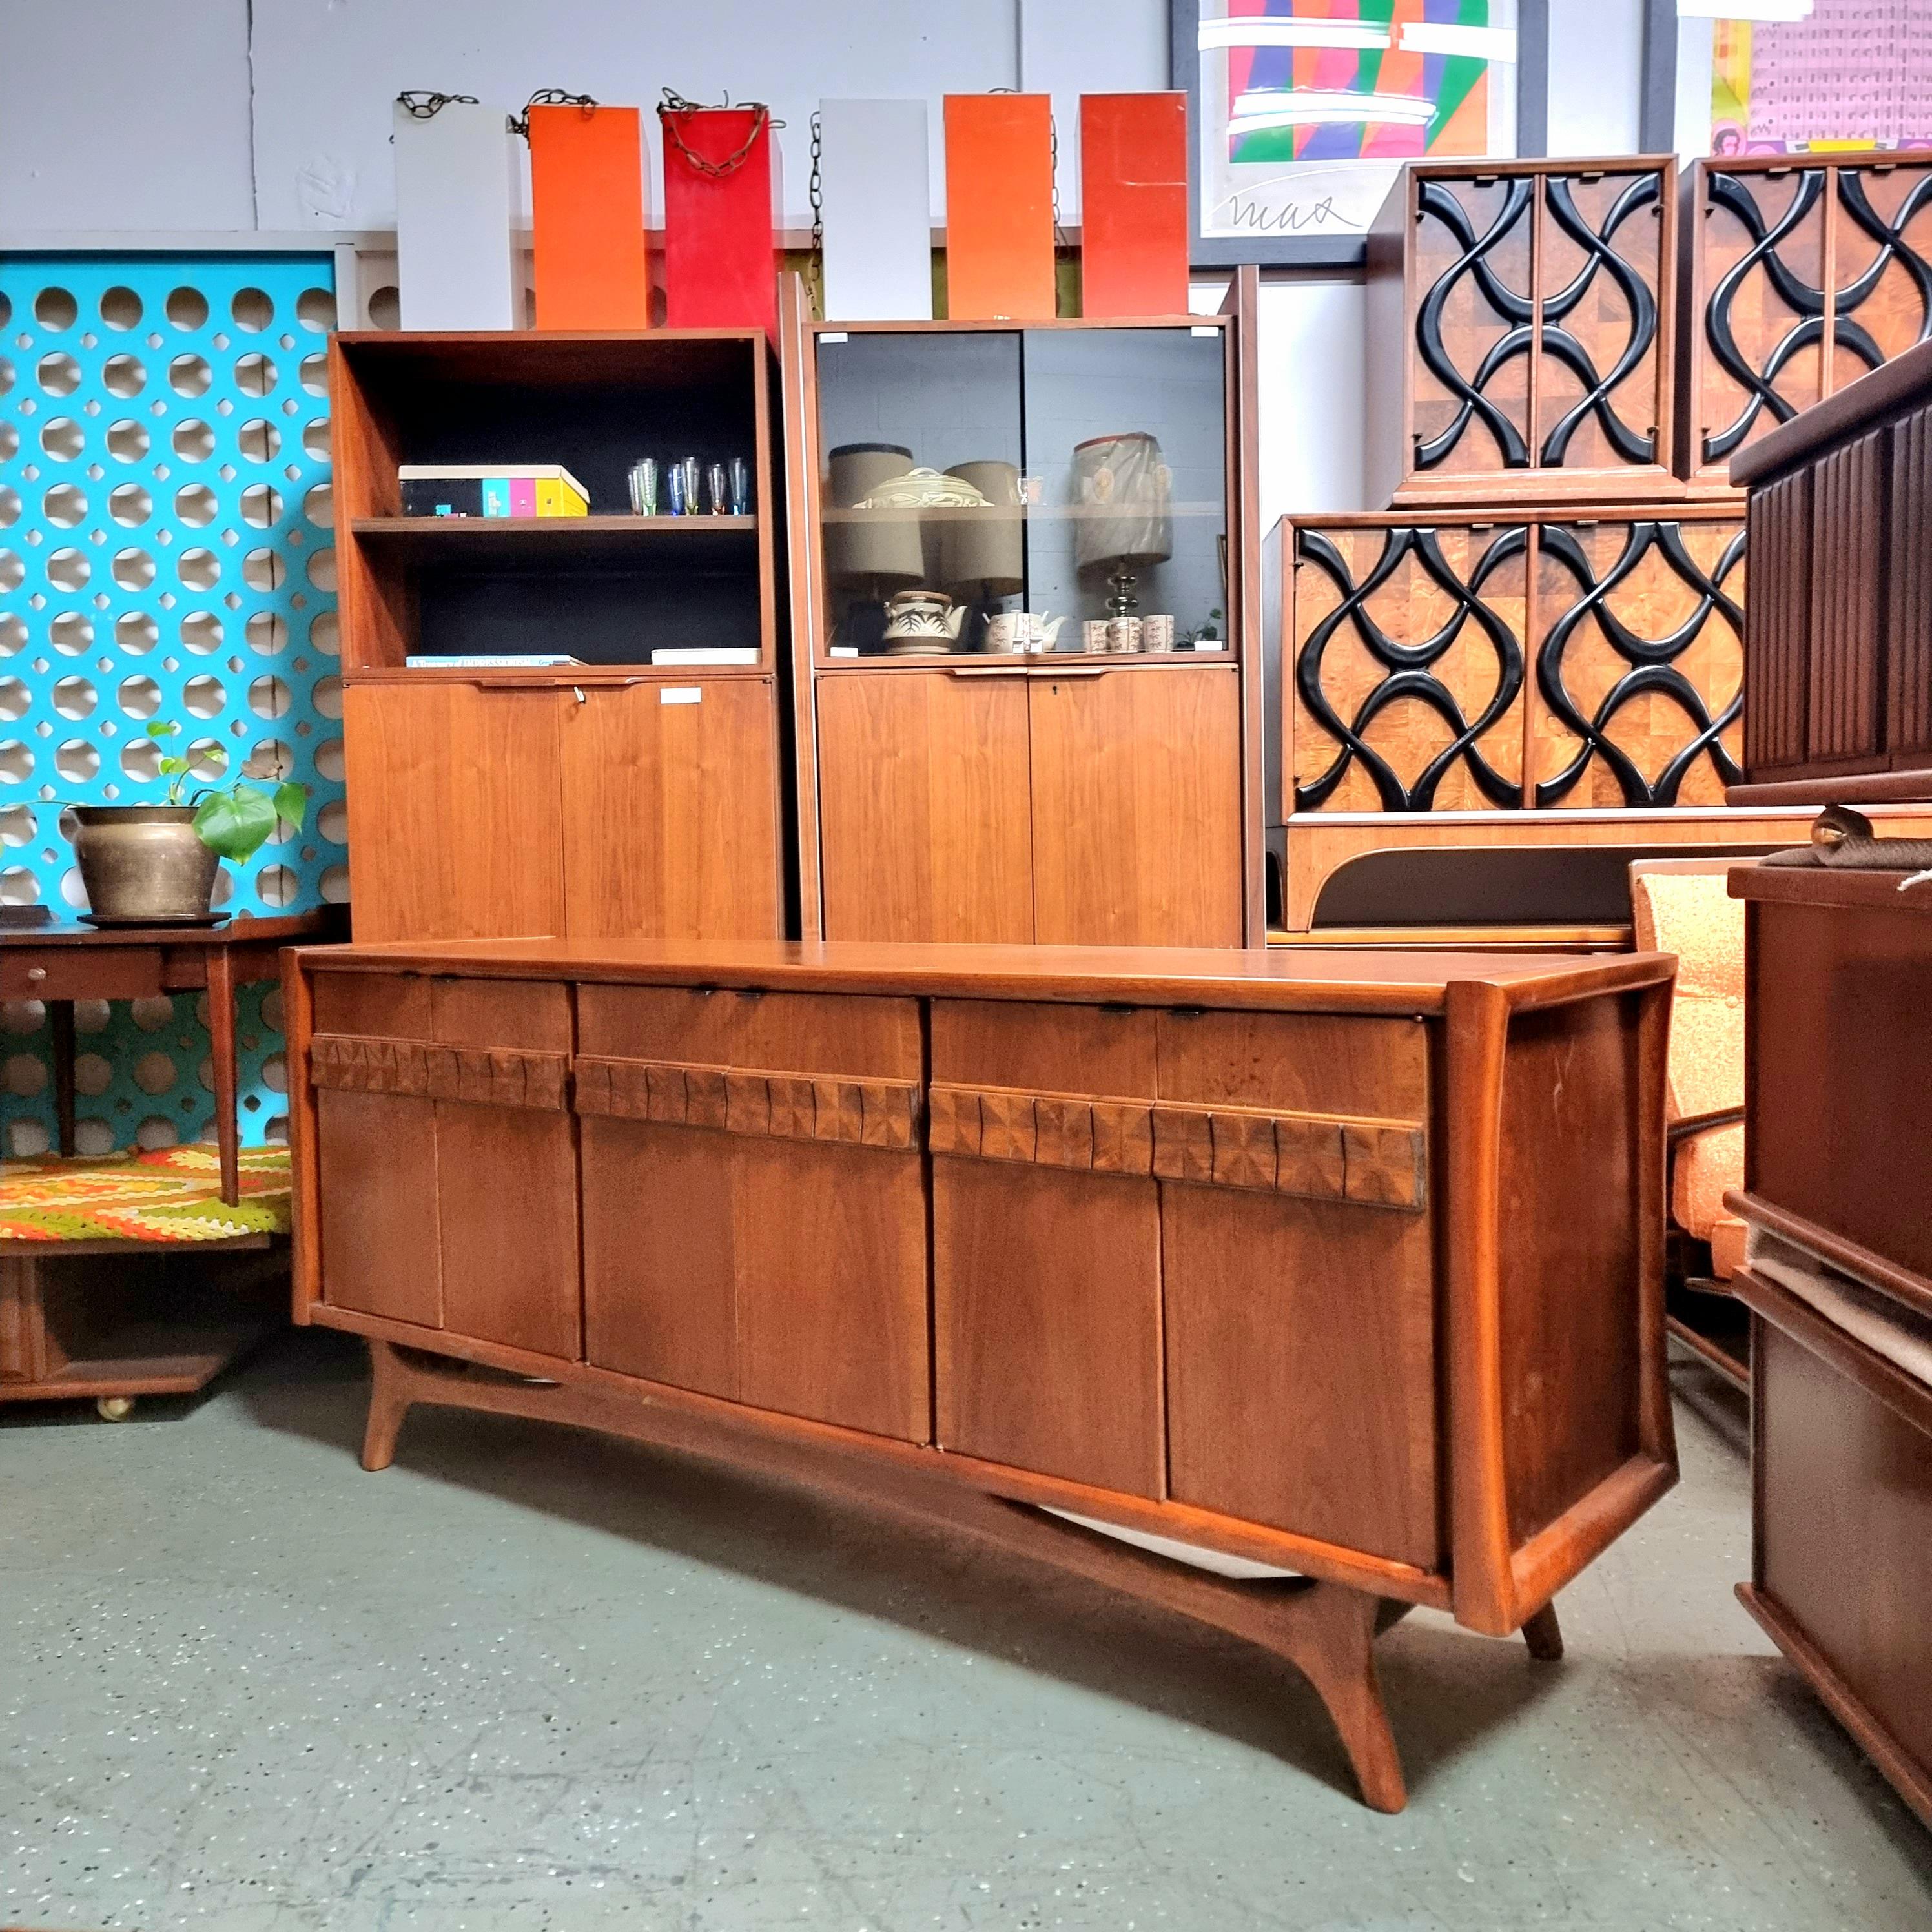 
Here is a large Mid Century credenza. Beautifully crafted, shows off a slight curve on the sides for an atomic look, beautiful geometric carved wood detail on doors and an amazing leg and stretcher detail at base for a killer silhouette!. Has